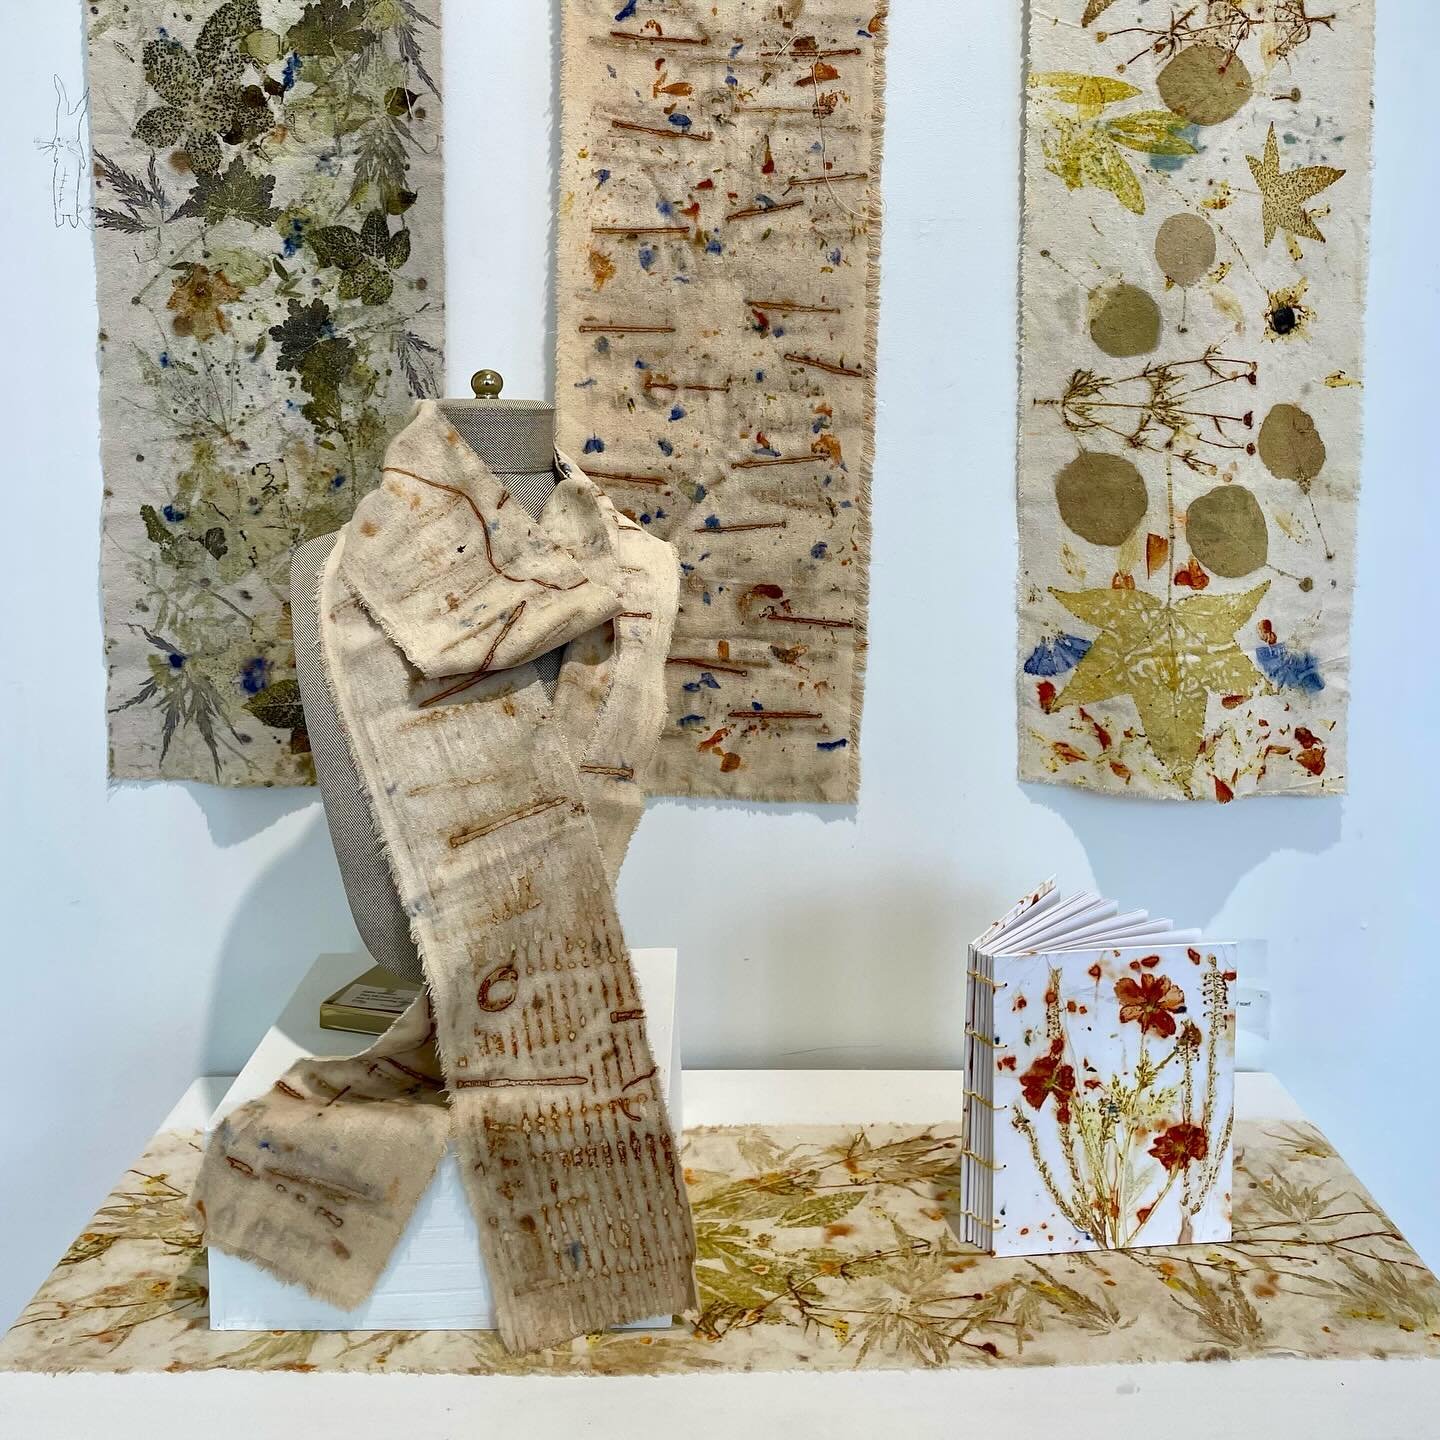 @kathyjohnsonart  ecoprints on raw silk (silk noil) are exquisite!  They are one of a kind and versatile as a scarf, wall hanging or a table runner.

Eco printing is the process of making botanical prints from the natural pigment found in leaves and 